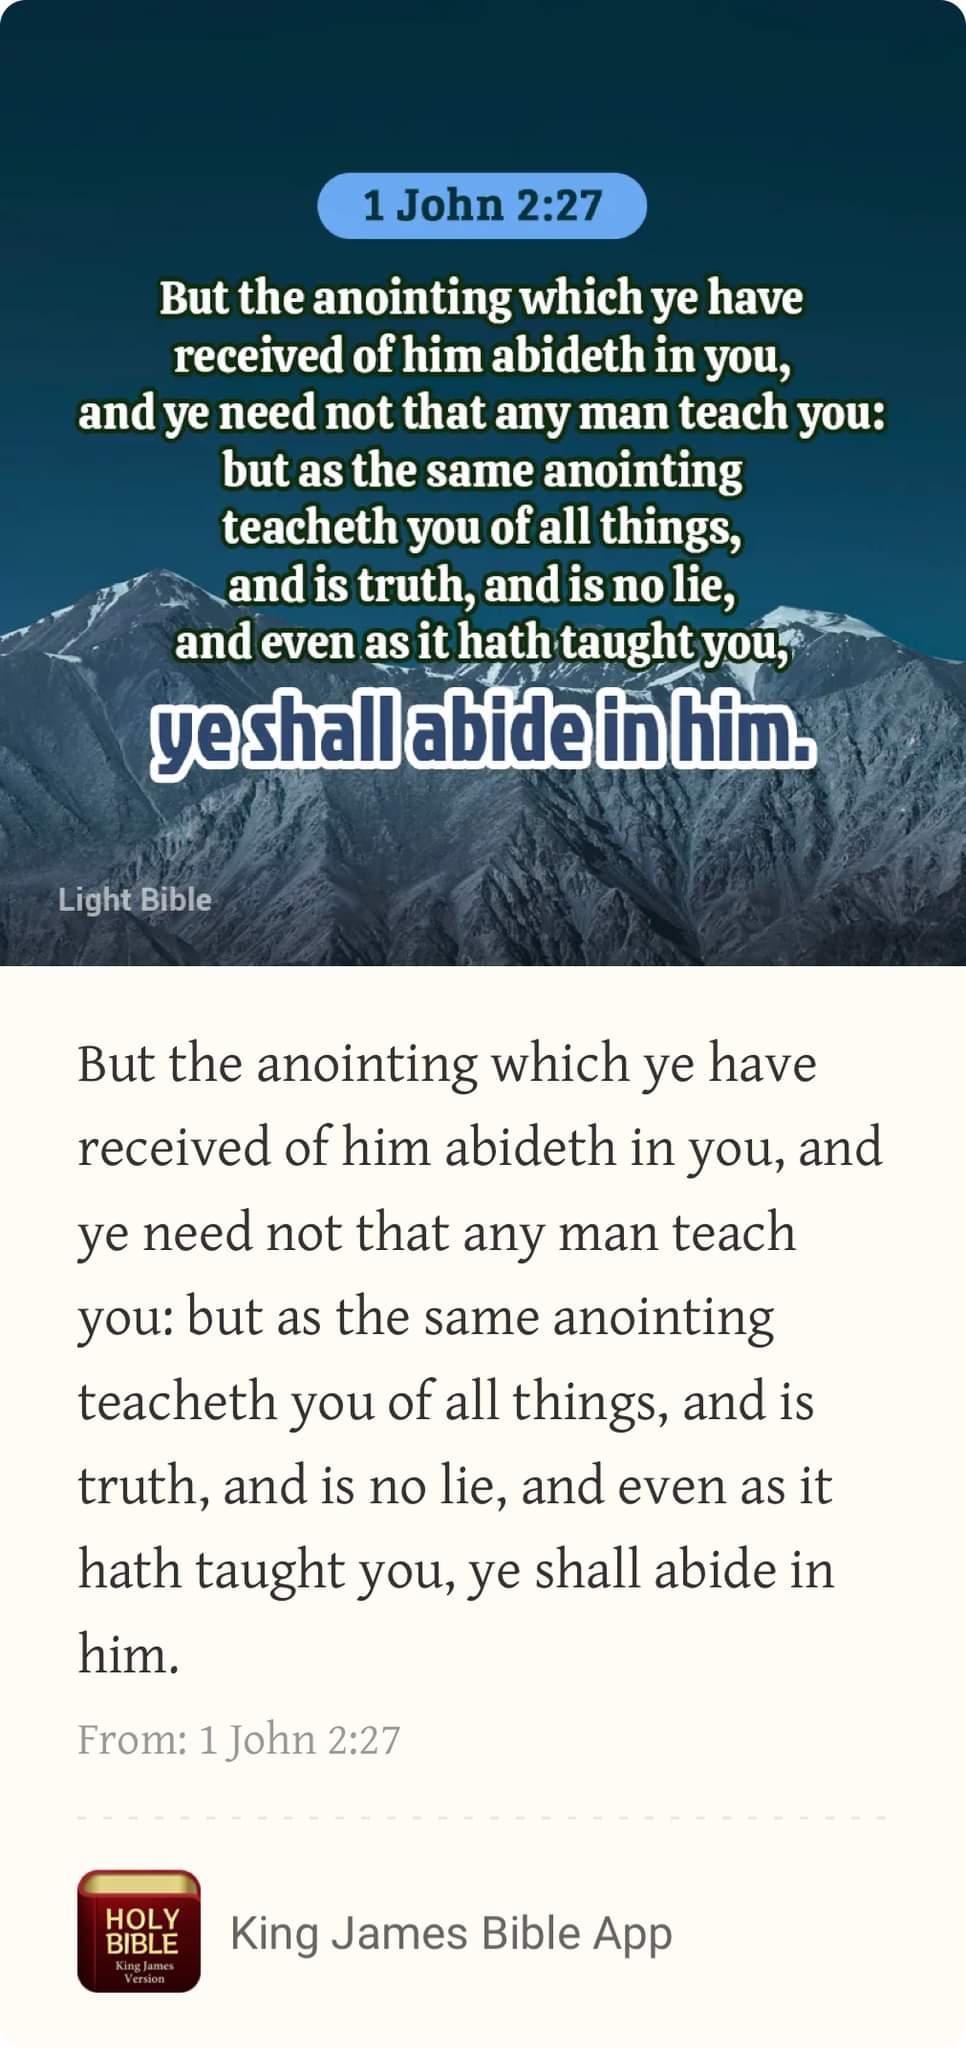 THE ANOINTING OF THE LORD ABIDETH IN YOU.